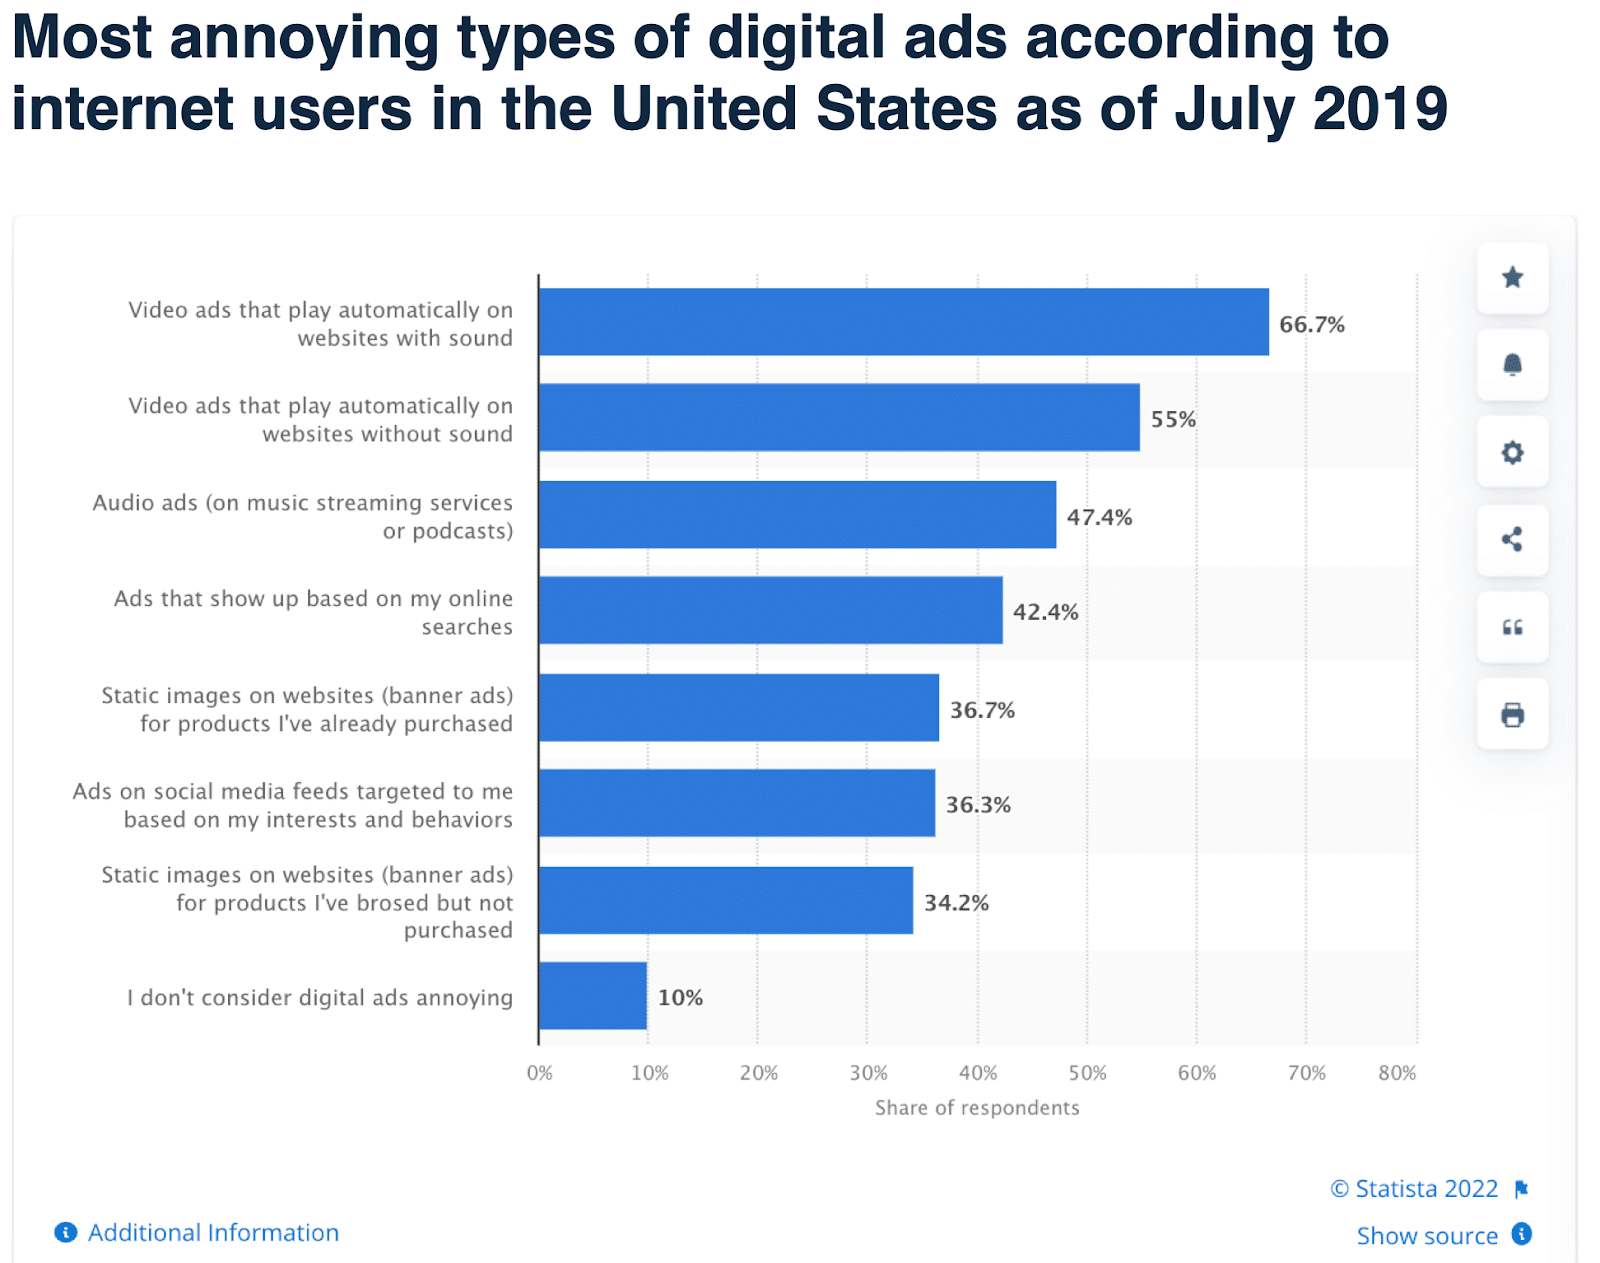 The most annoying types of digital ads in the US